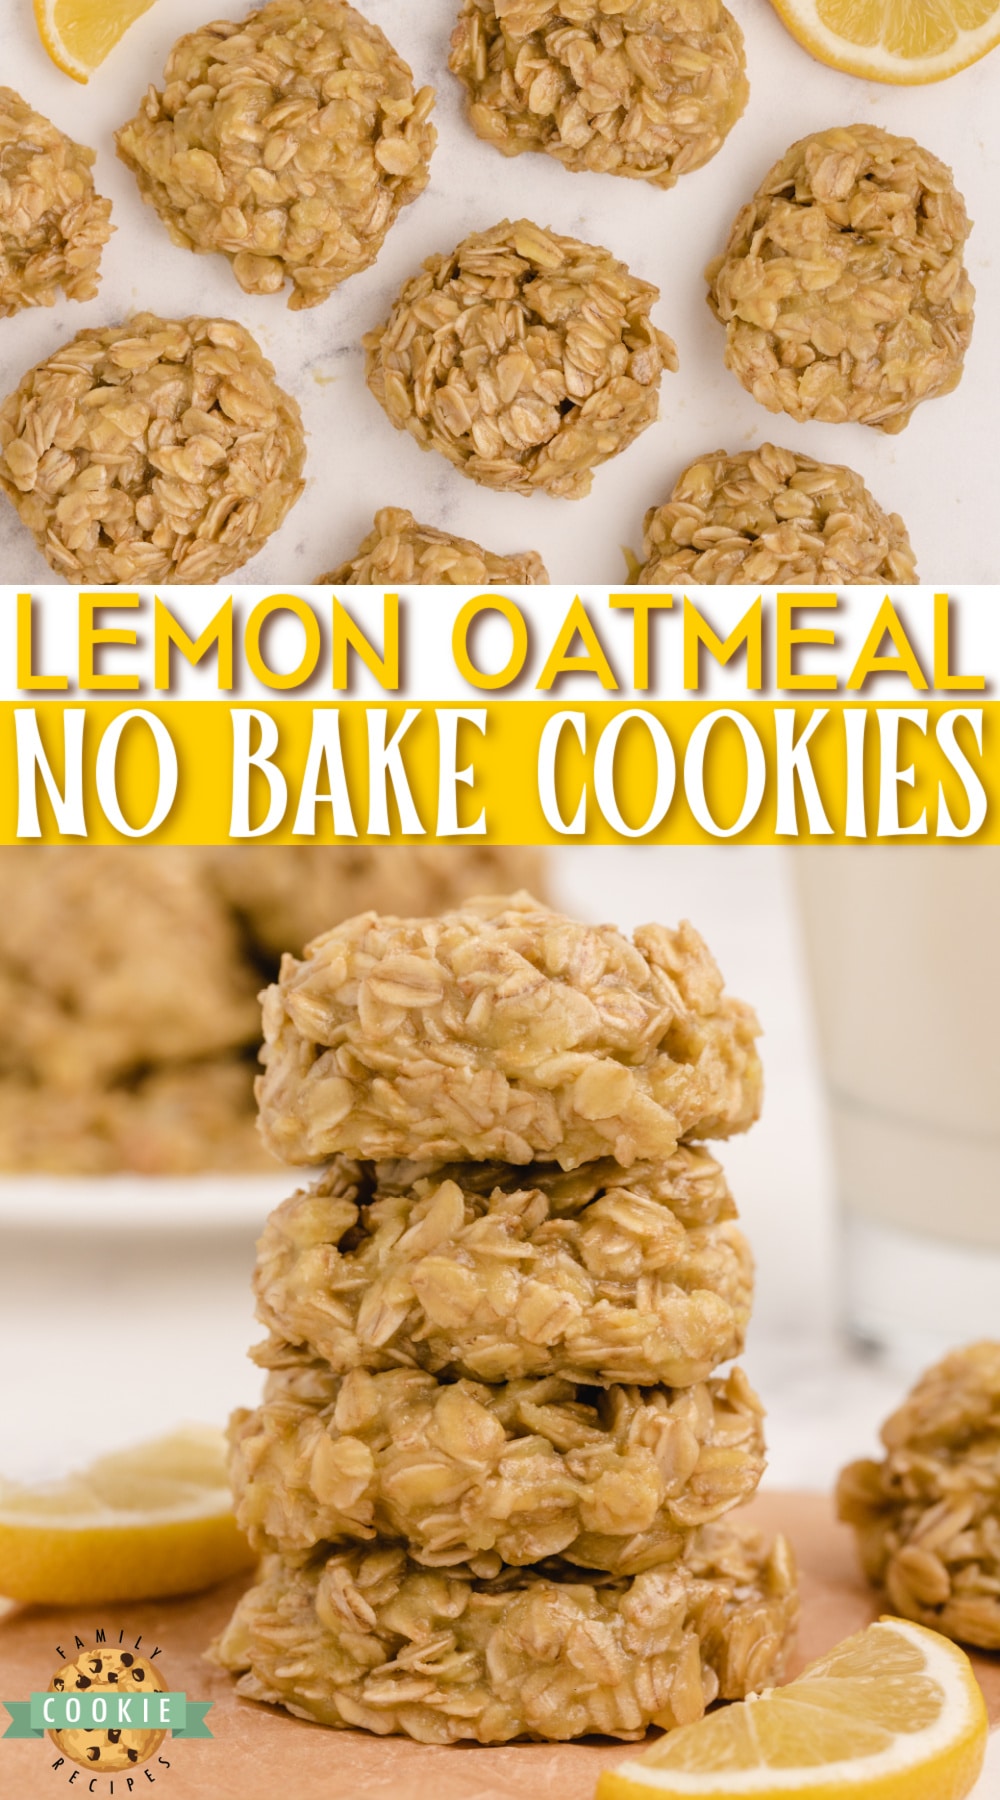 Lemon Oatmeal No Bake Cookies are simple oatmeal cookies made with just a few ingredients. Delicious no bake cookie recipe packed with lemon flavor! via @buttergirls